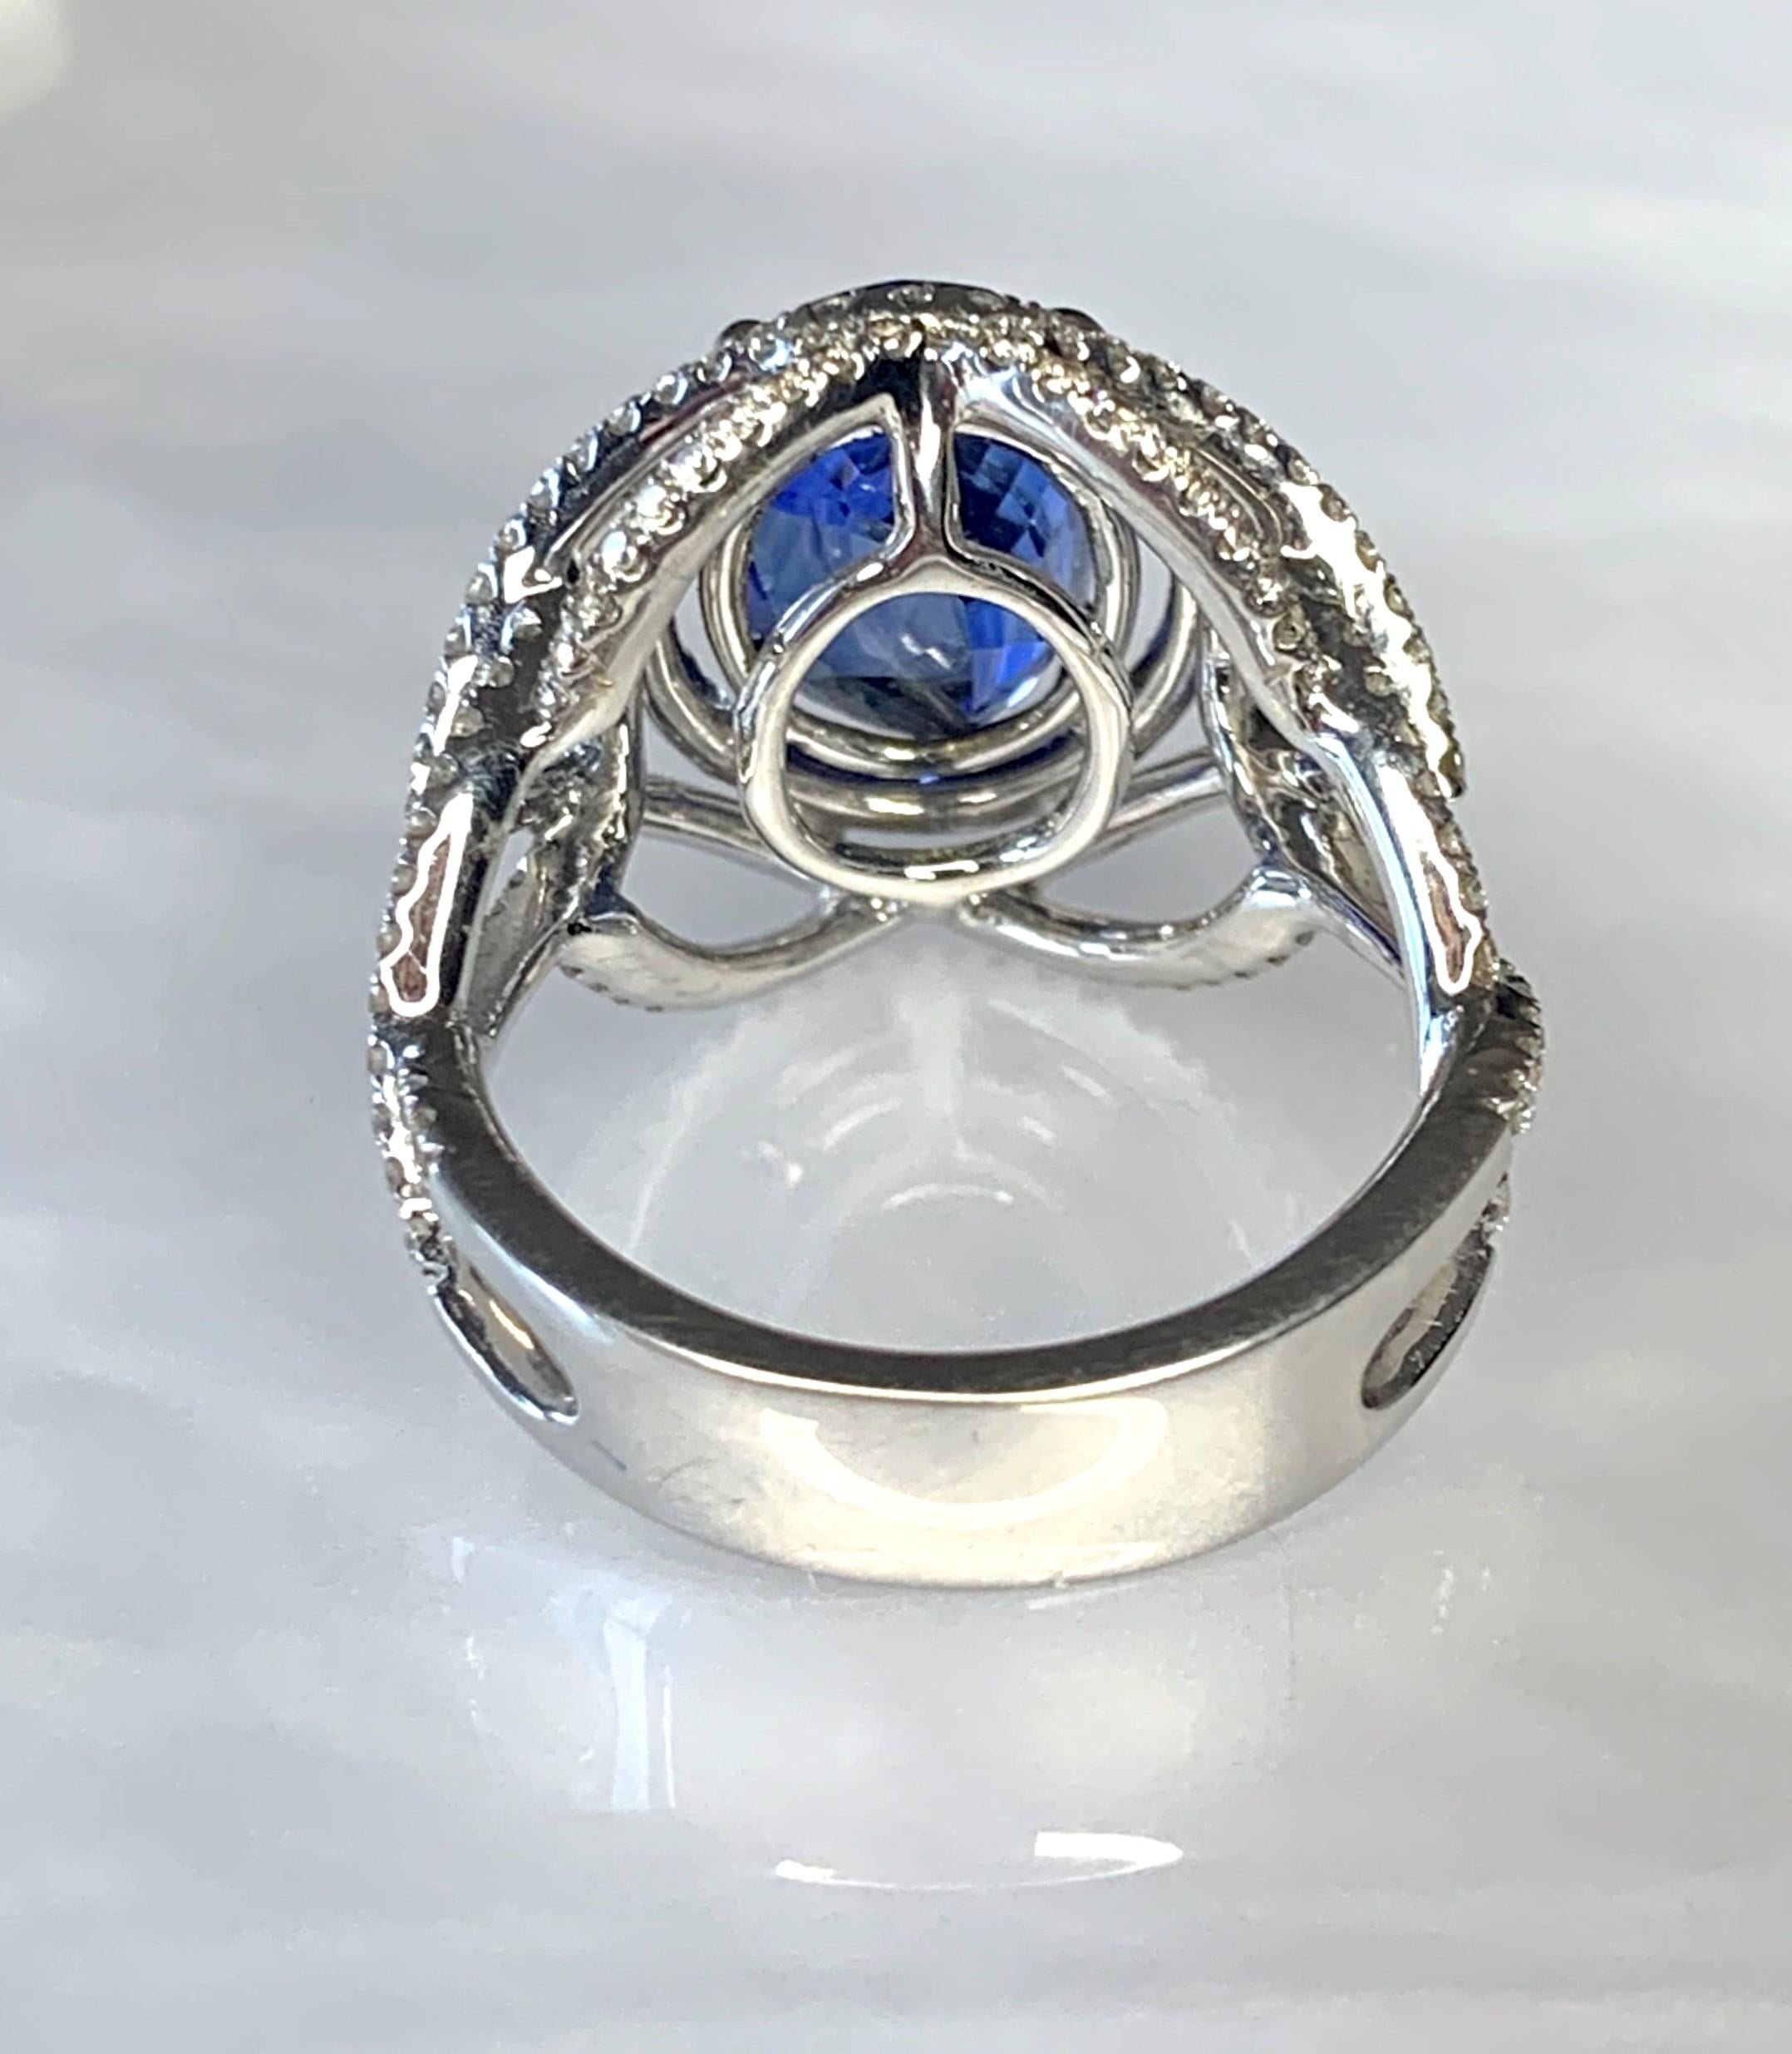 This phenomenal rich blue genuine sapphire ring is a true work of art. It features a vibrant oval center stone weighing 5.05 carats surrounded by 1.11 carats of sparkling white diamonds which have been intricately detailed with master craftsmanship